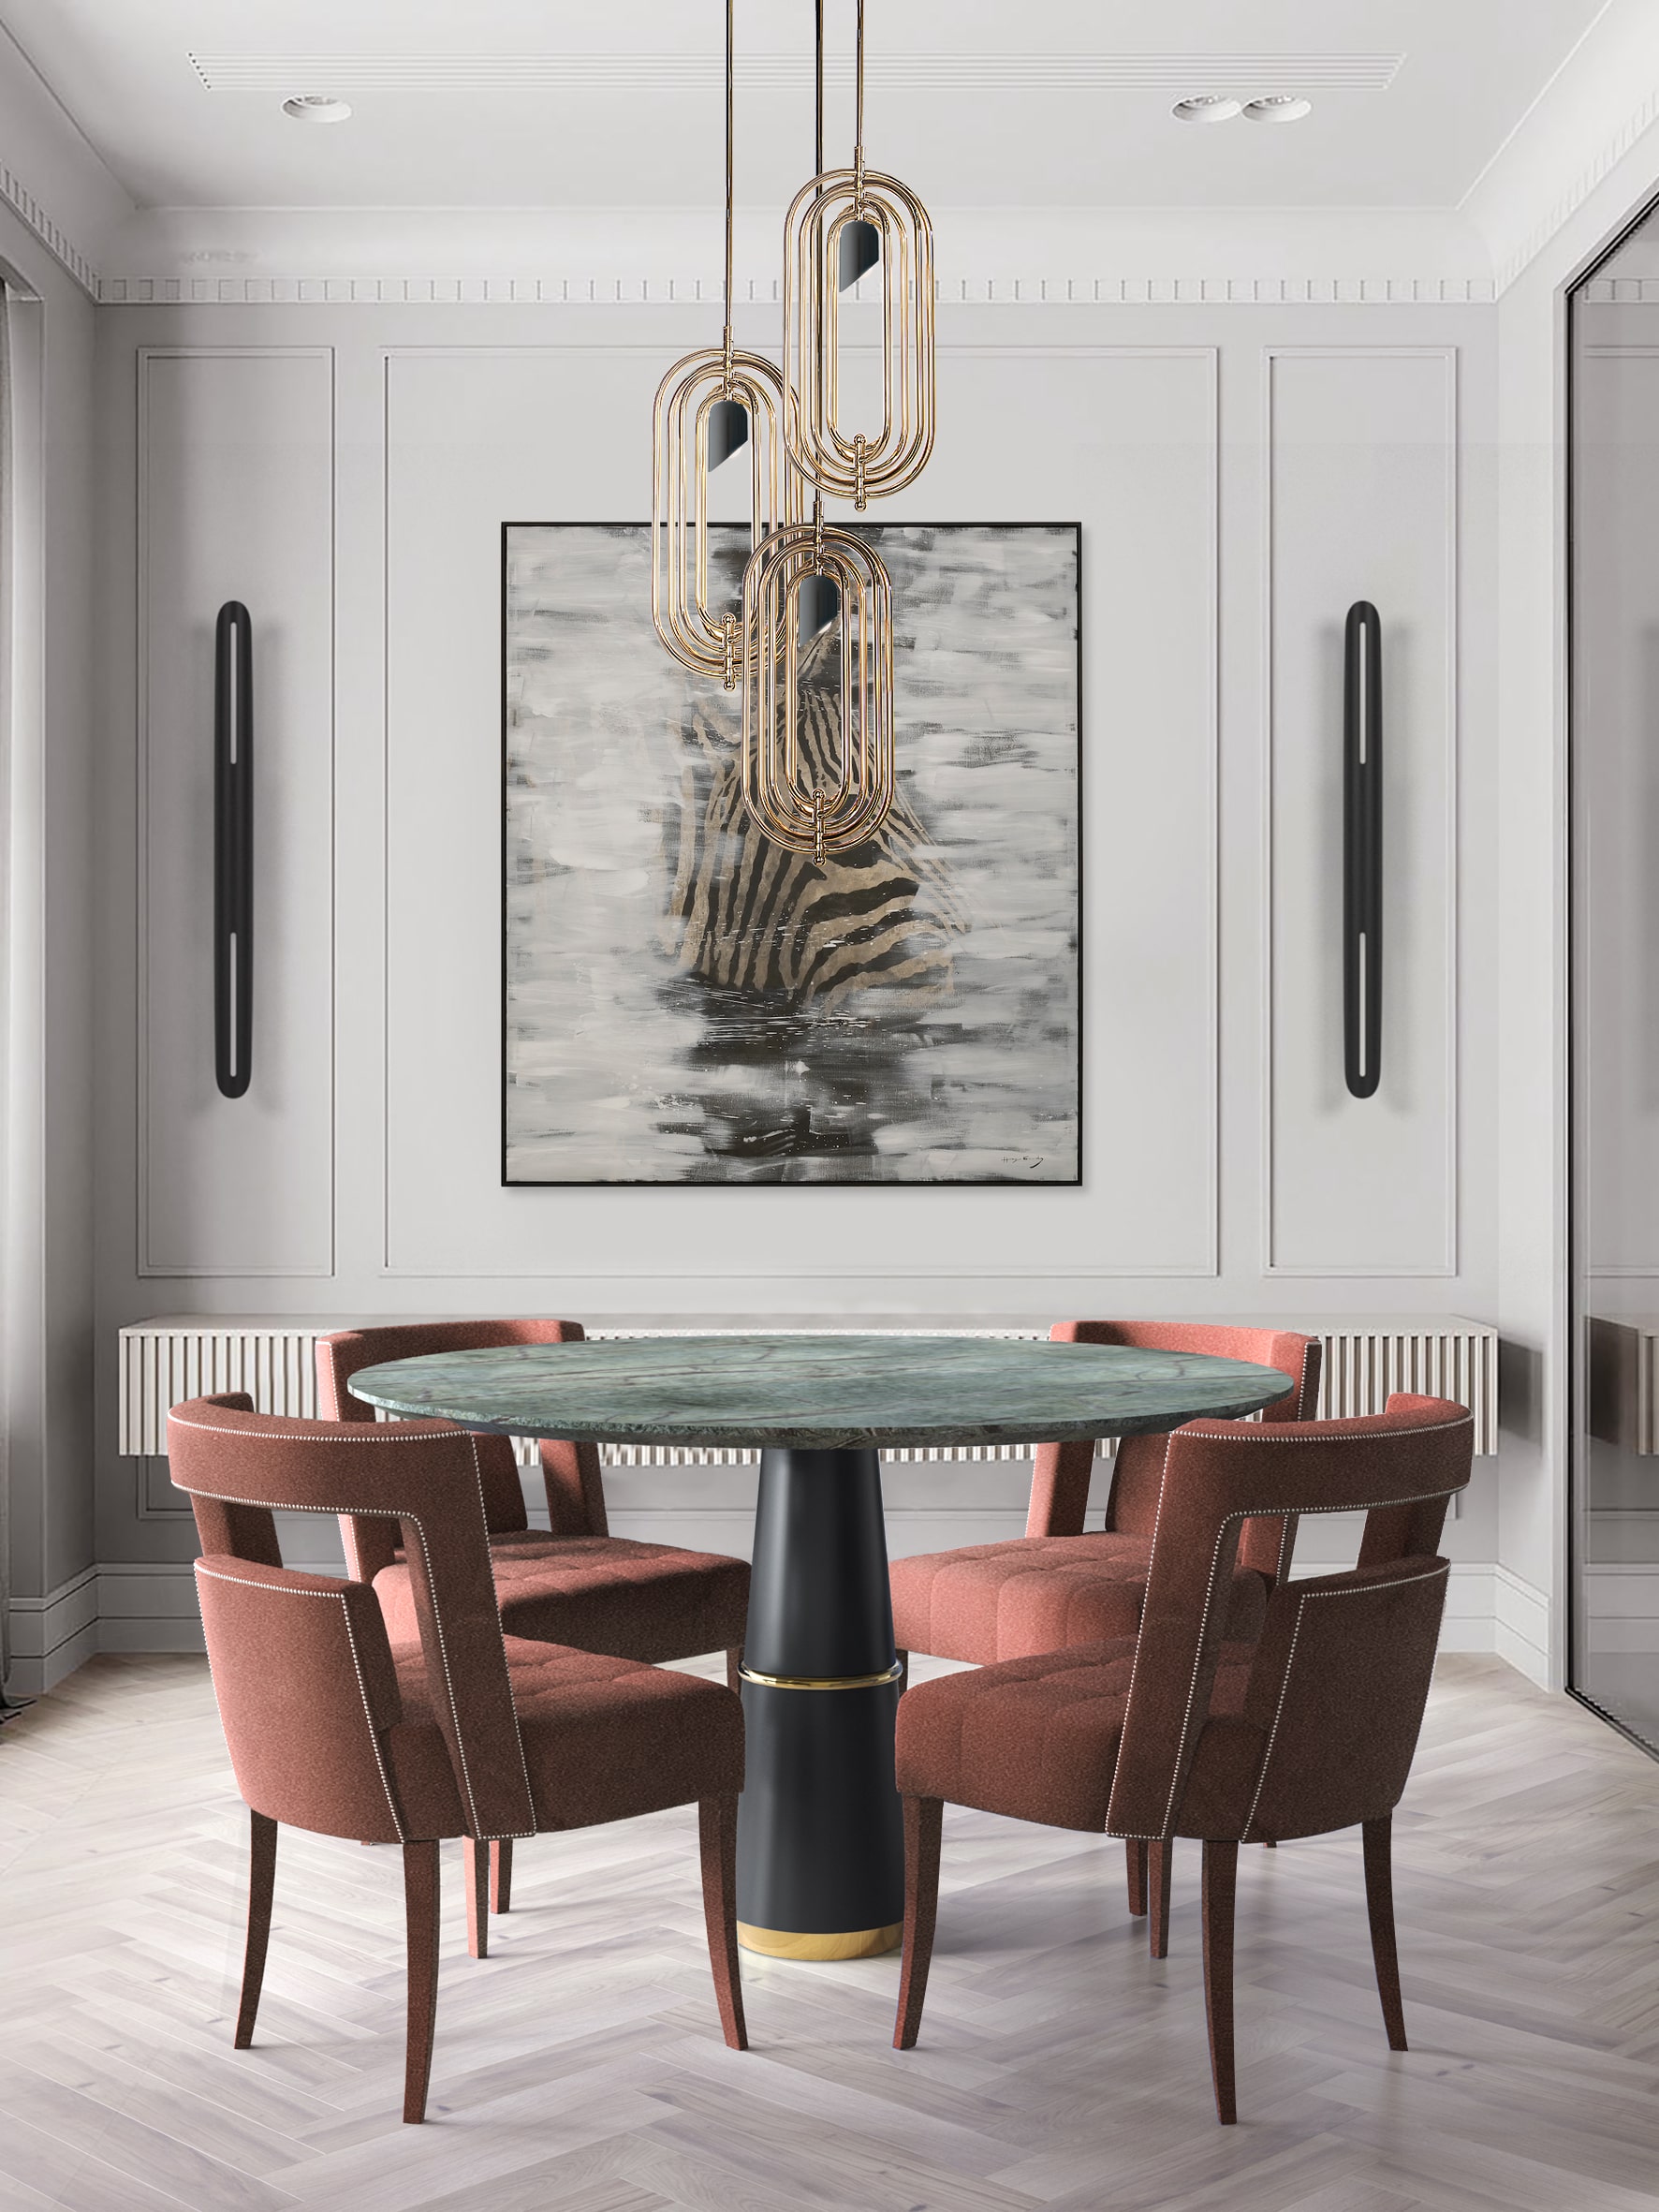 Fancy Dining Room Decor With Marble Round Table - Home'Society